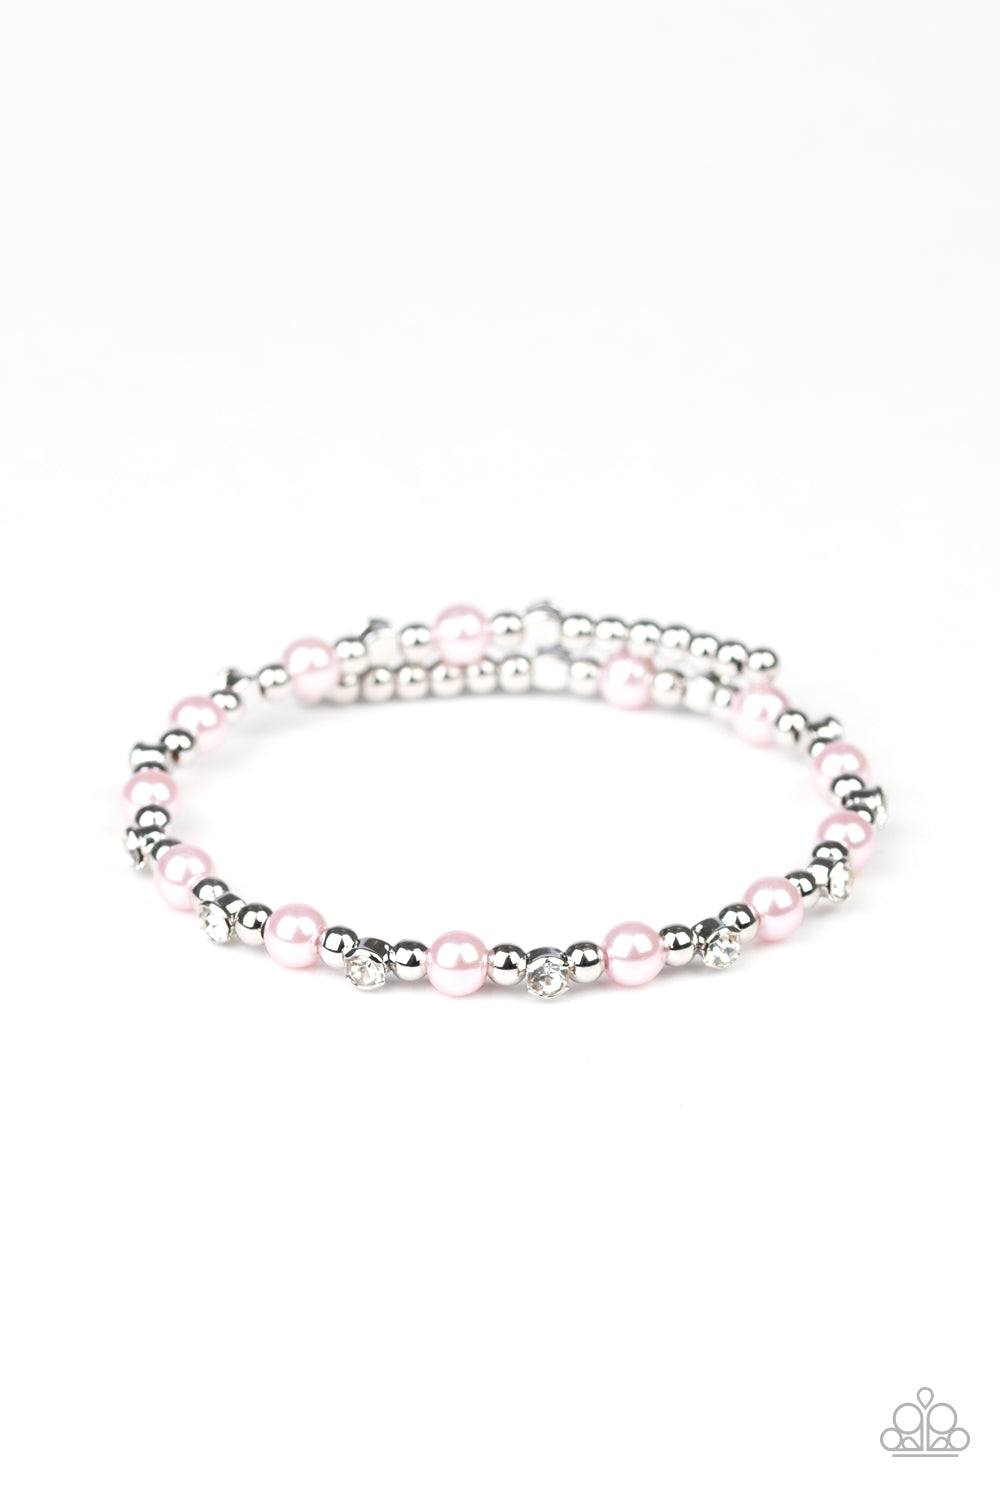 DECADENTLY DAINTY - PINK PEARLS SILVER BEADS COIL BRACELET